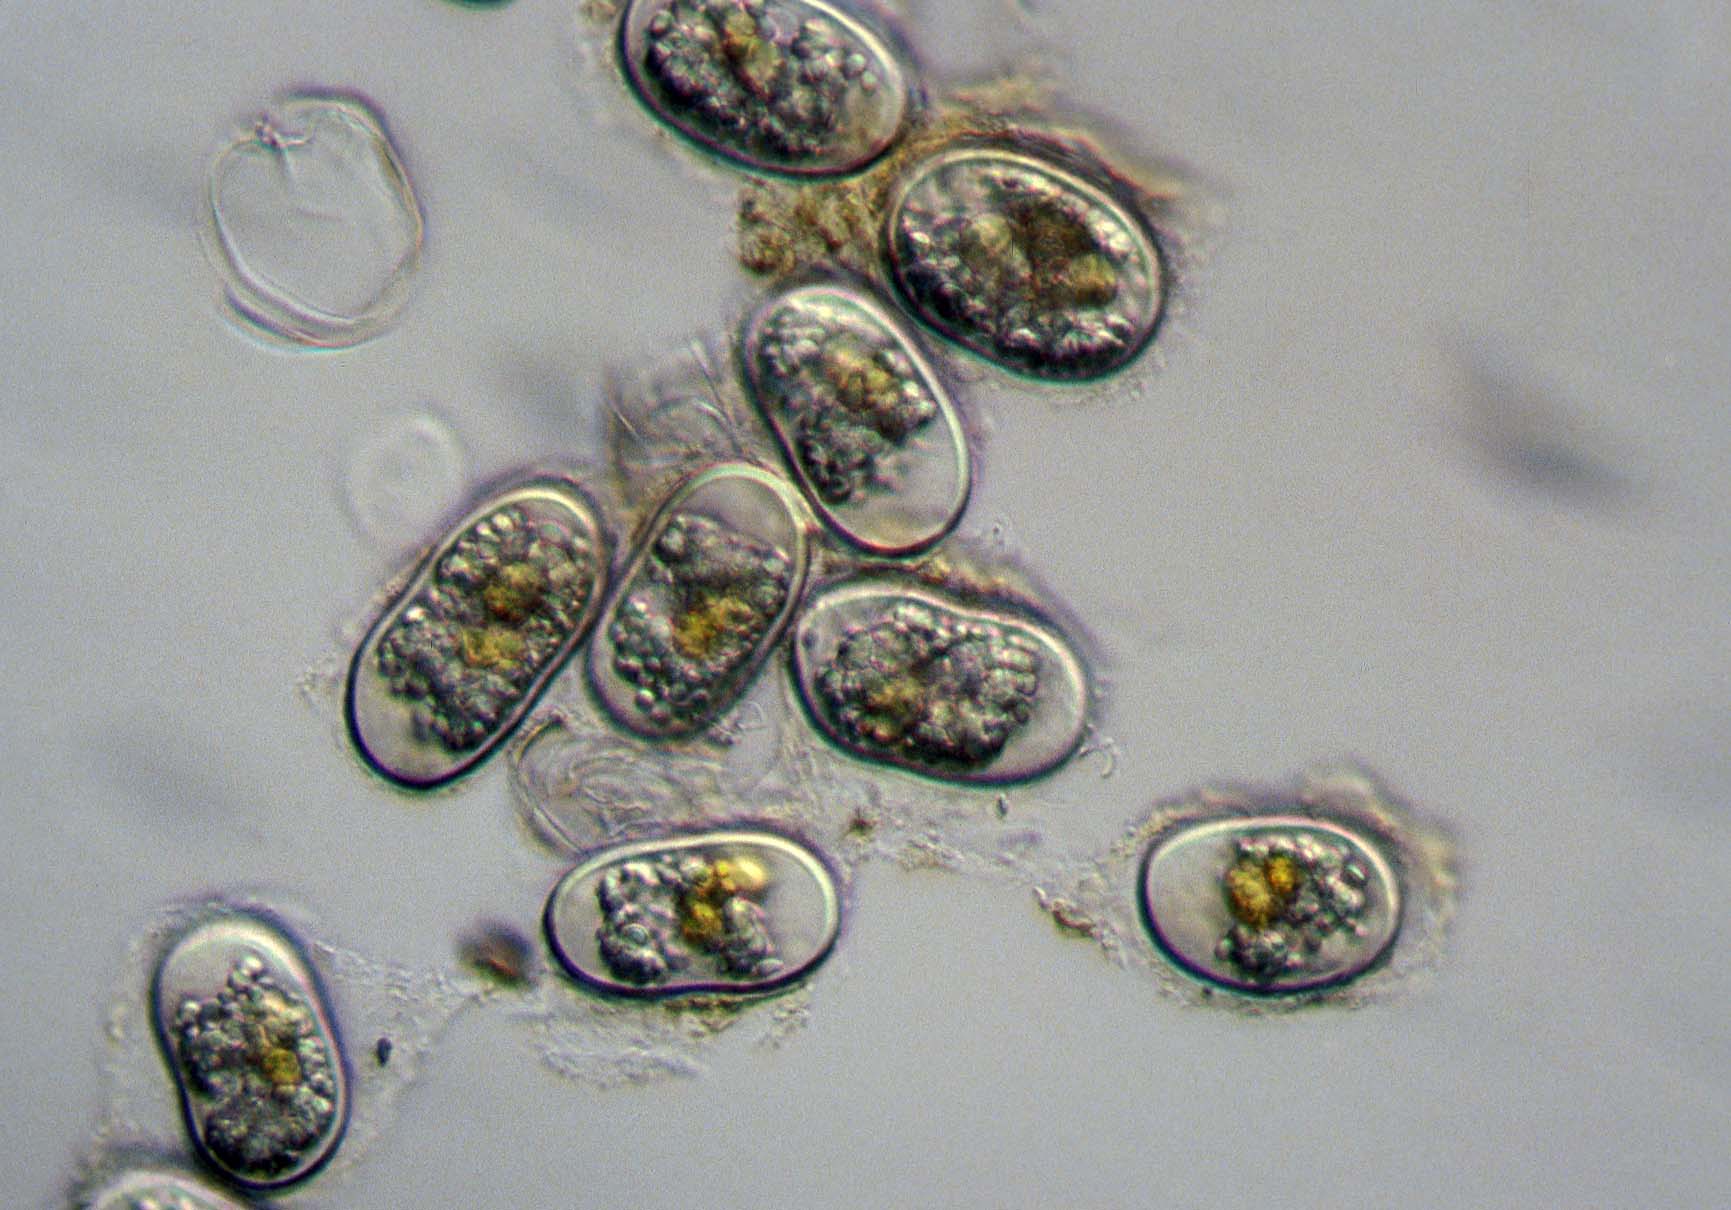 Microscopic view of A. tamarense cysts.